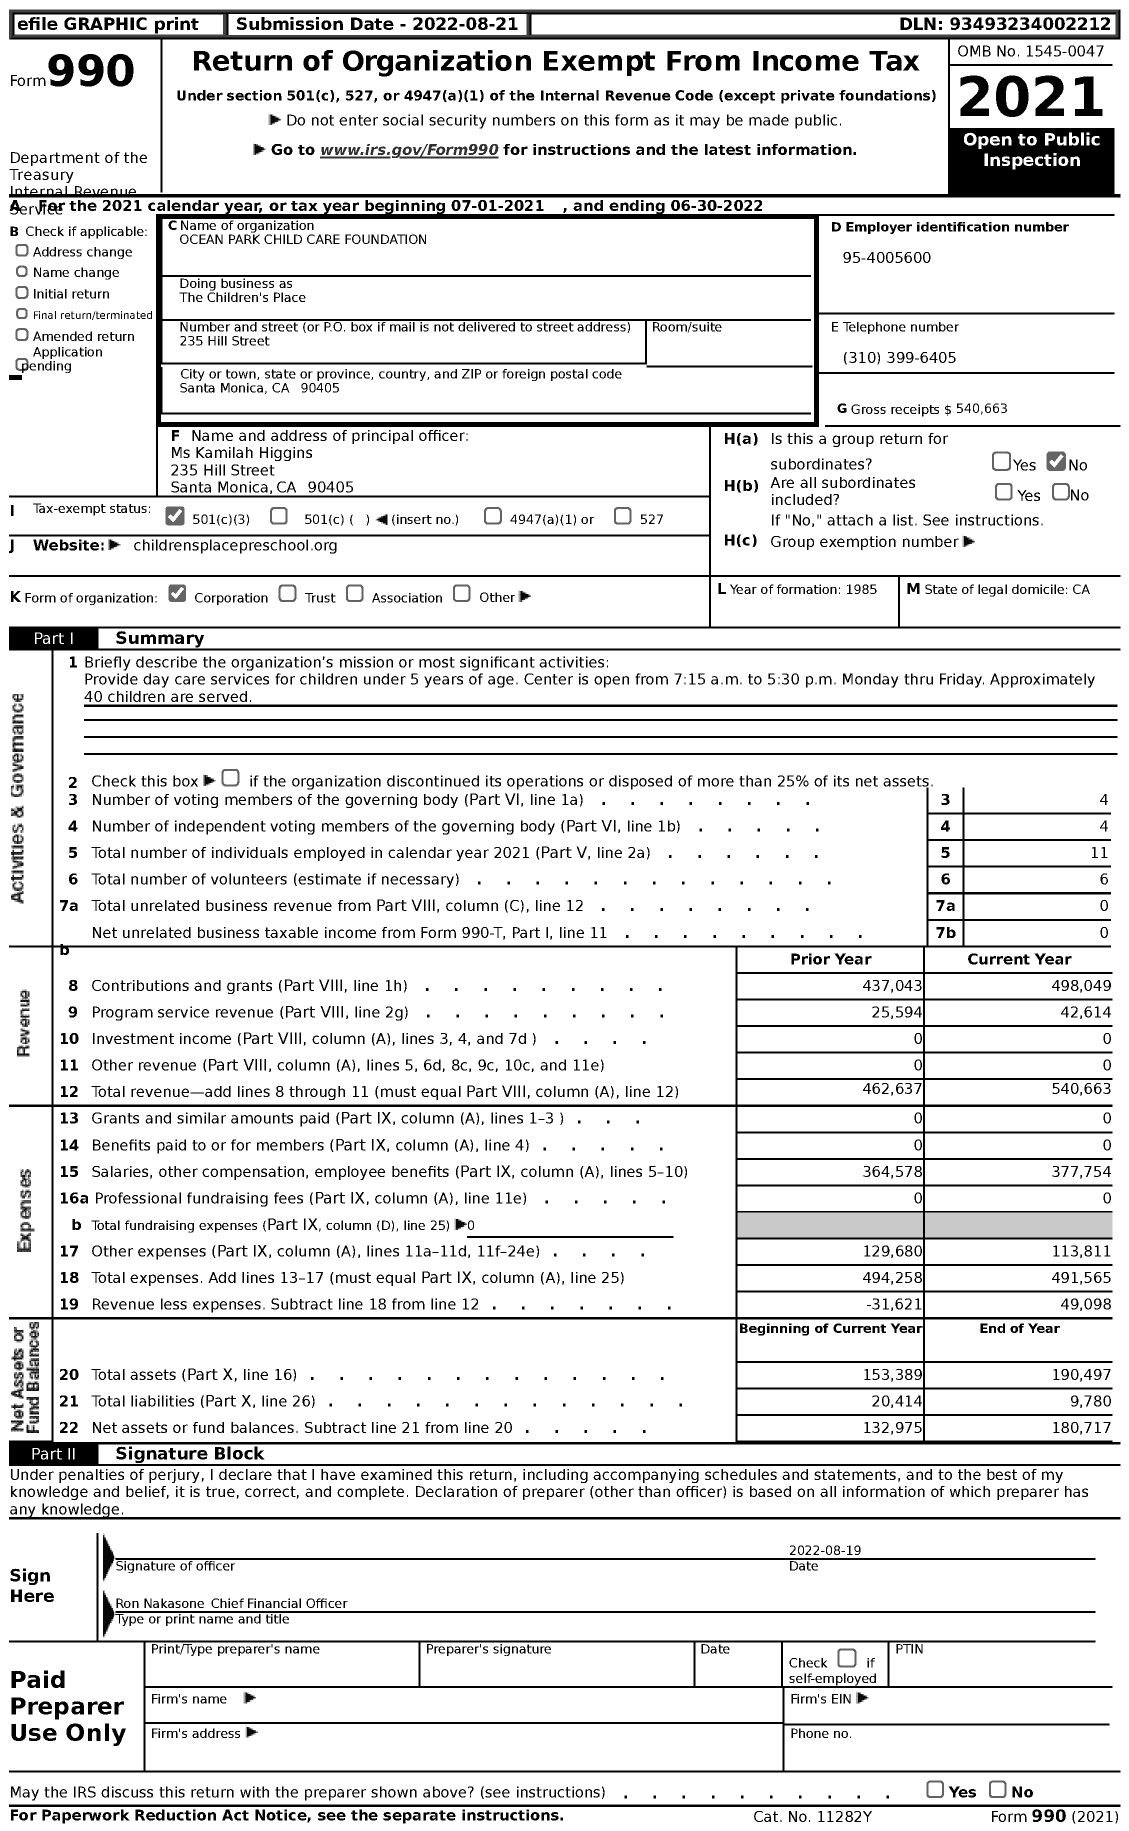 Image of first page of 2021 Form 990 for The Children's Place / Ocean Park Child Care Foundation